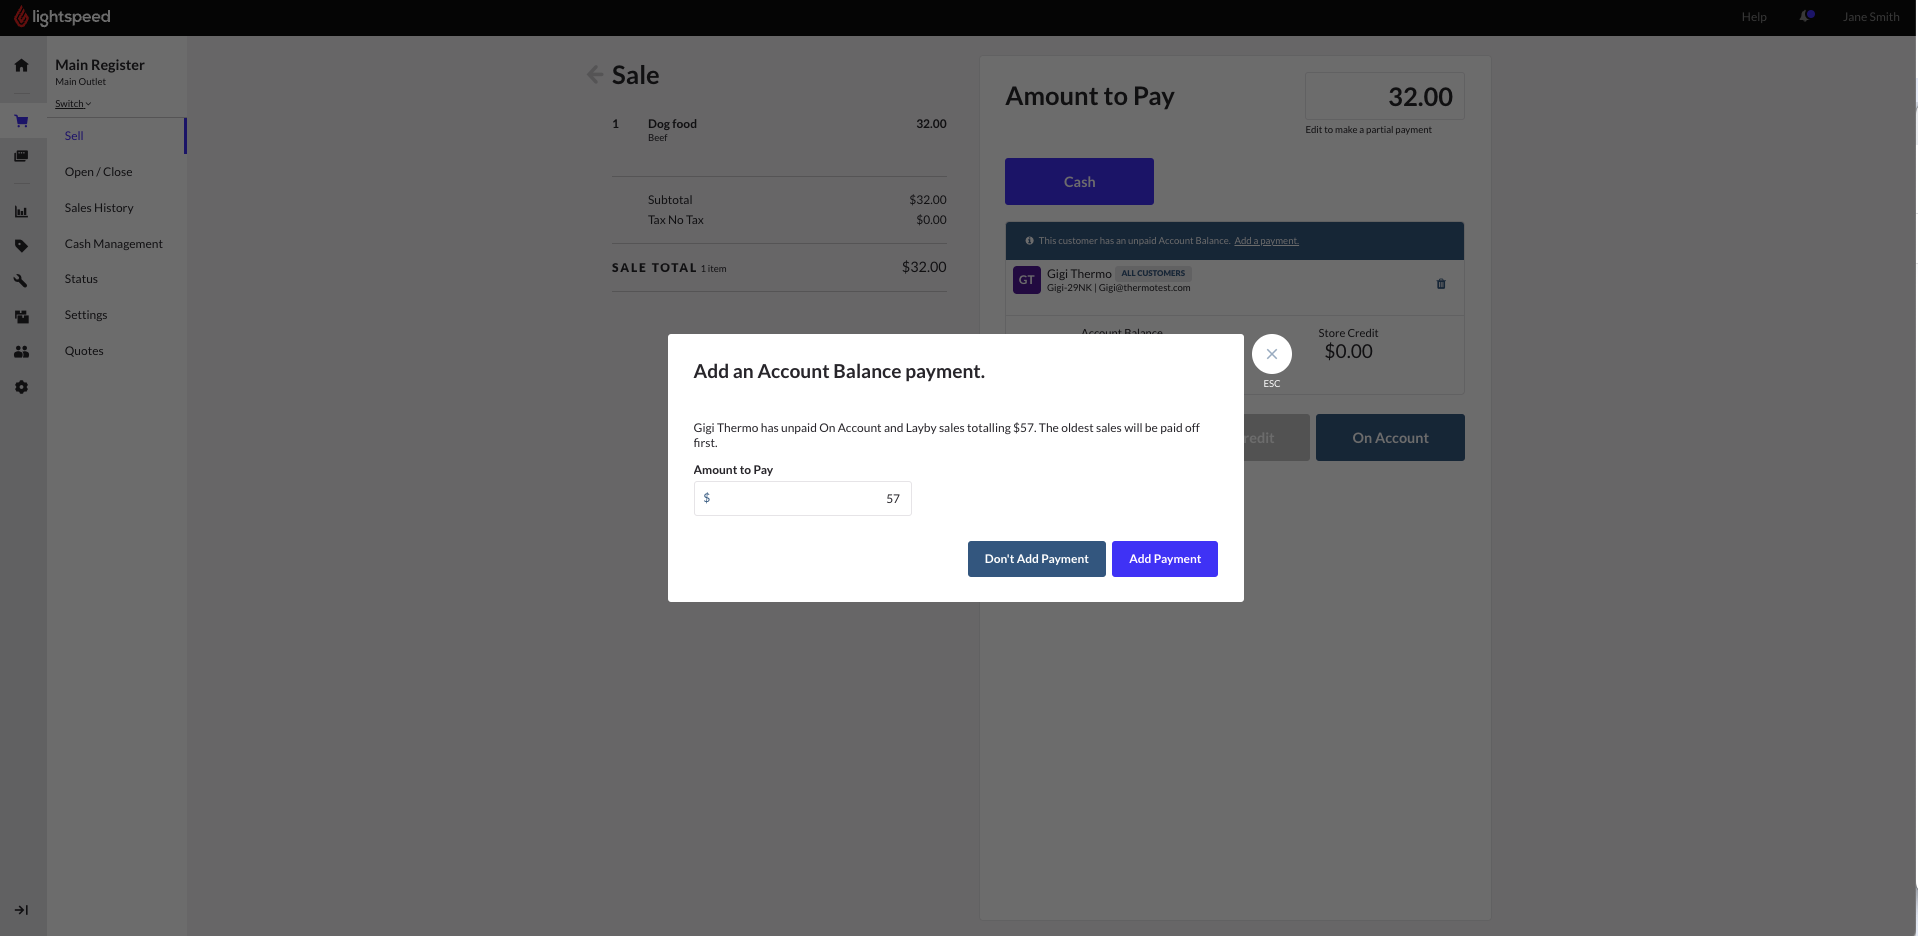 add_a_payment_to_pay_outstanding_balance_on_account.png